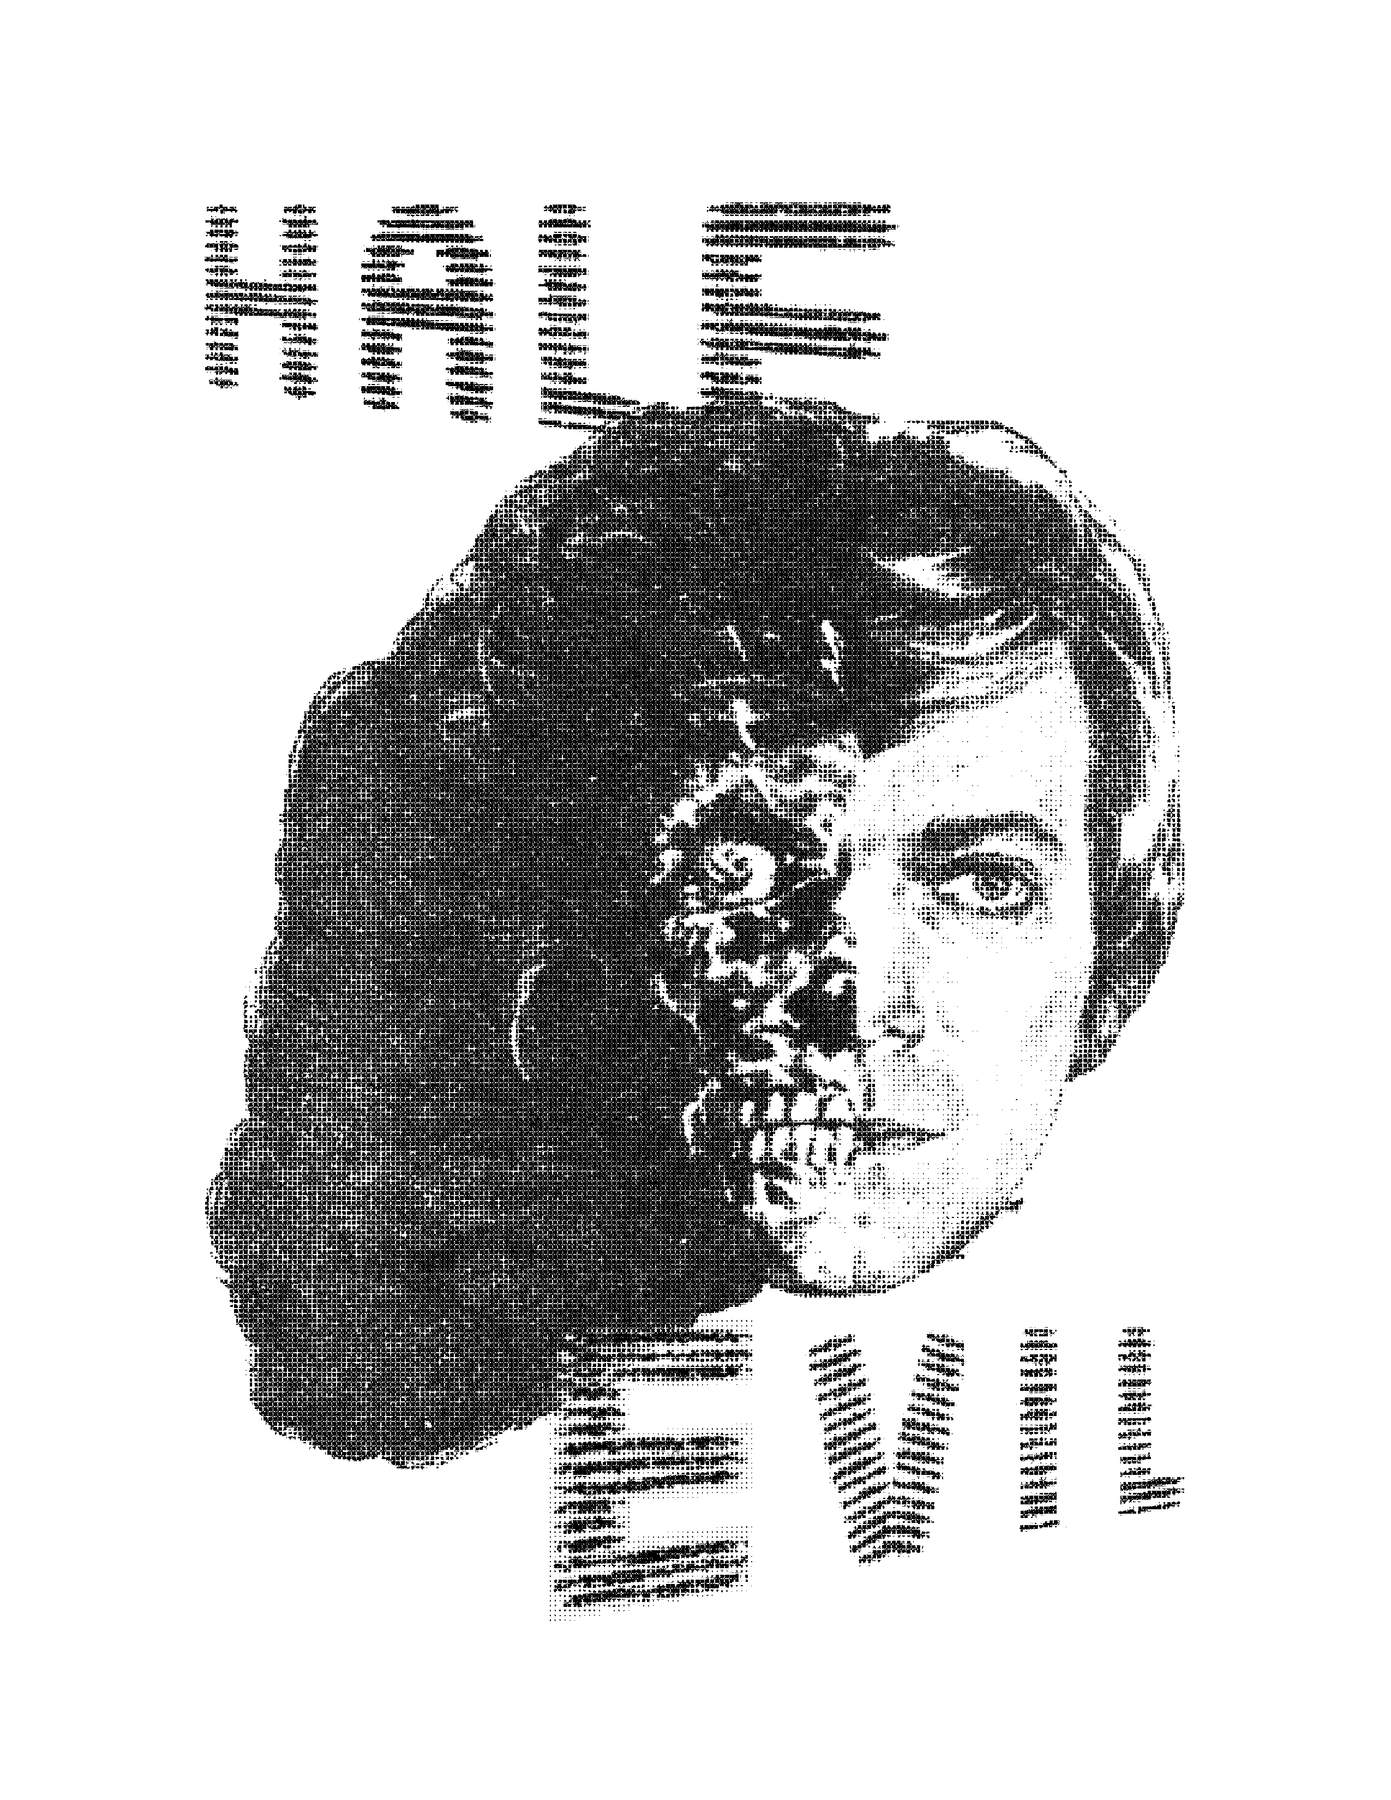 mock-i-made-for-halfevil-which-they-sorely-dissaproved.jpg